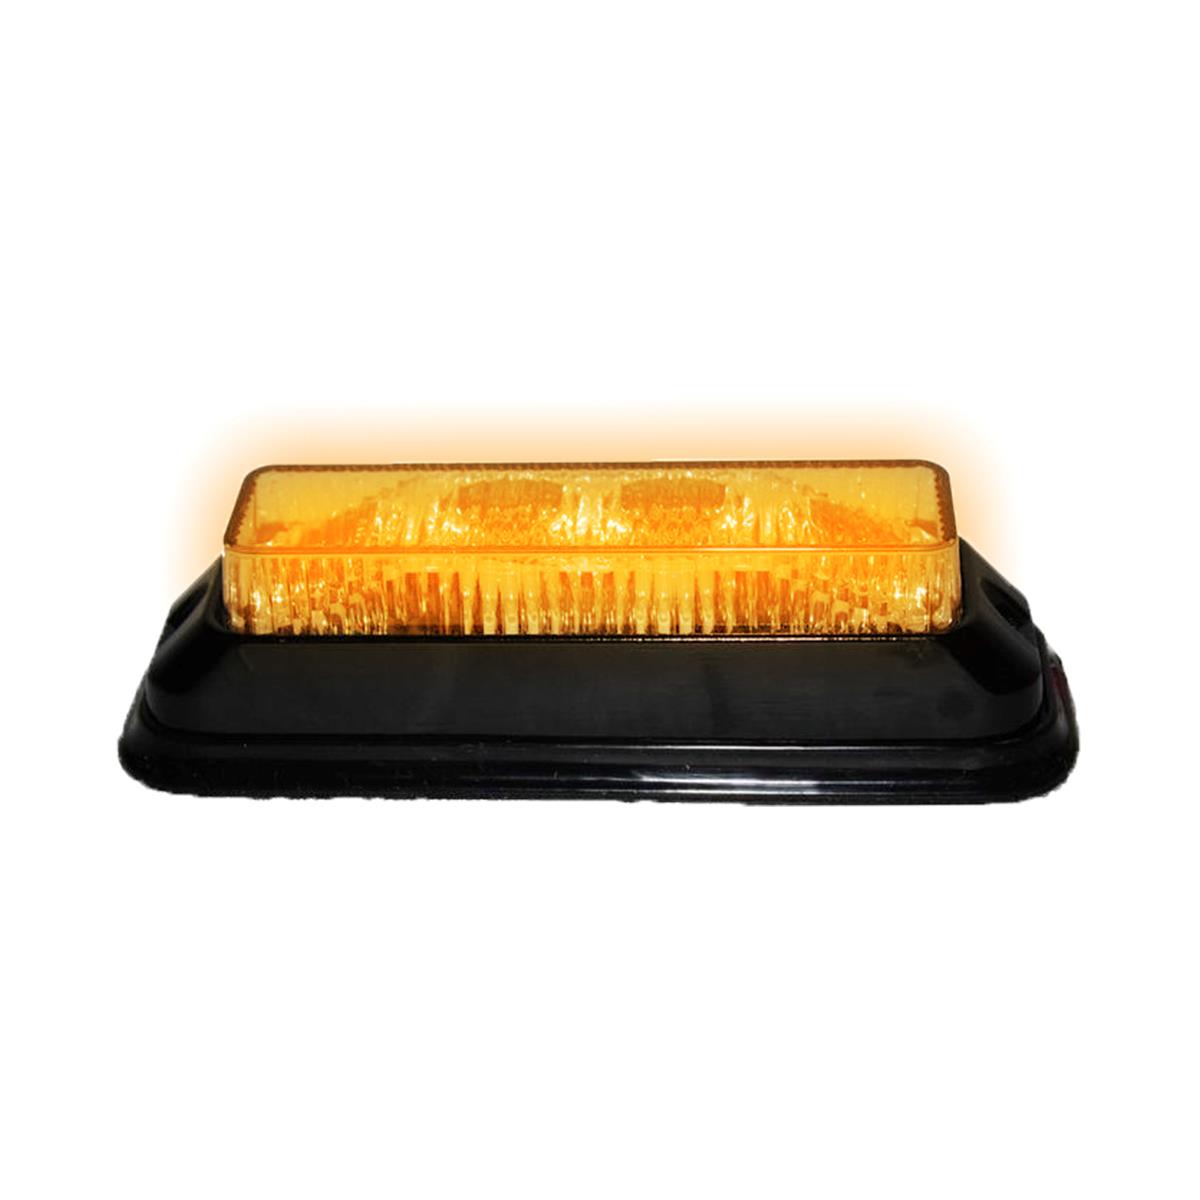 LED Warning Lamp 1” x 4” 4 Diode Mini-Strobe Wide Angle Amber Clear Lens